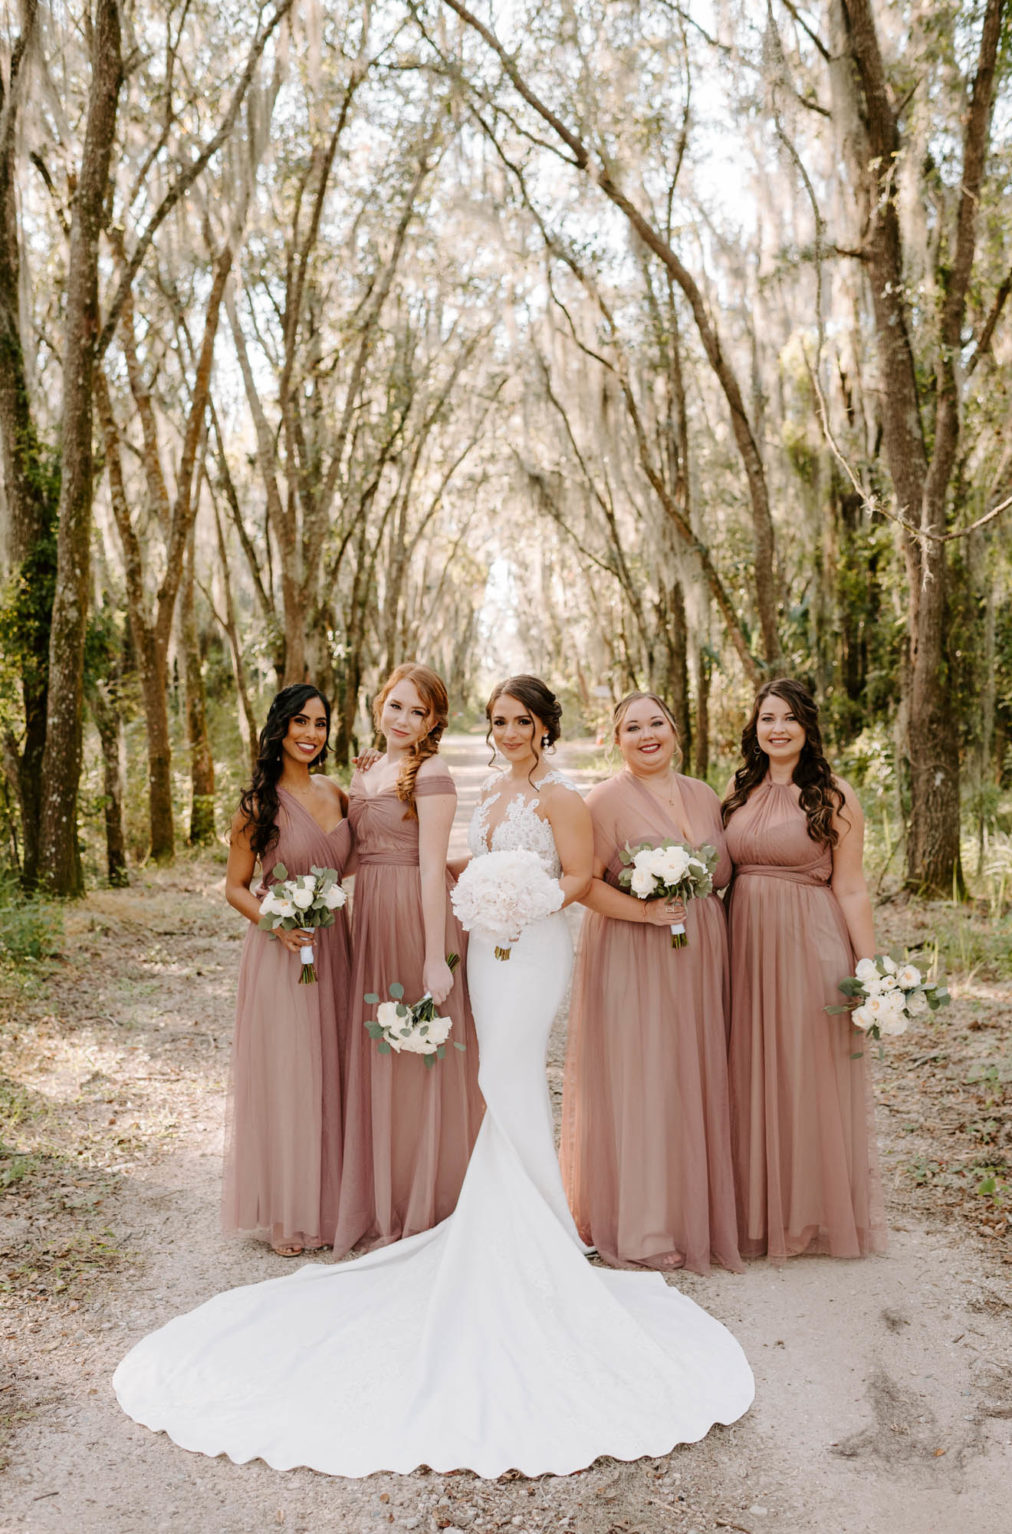 Outdoor Bridal Party Portrait | Illusion Lace Bodice Sheath Bridal Gown Wedding Dress | White Peony Bride Bouquet | Dusty Rose Mauve Pink Long Bridesmaid Dresses | White Rose and Greenery Bouquets